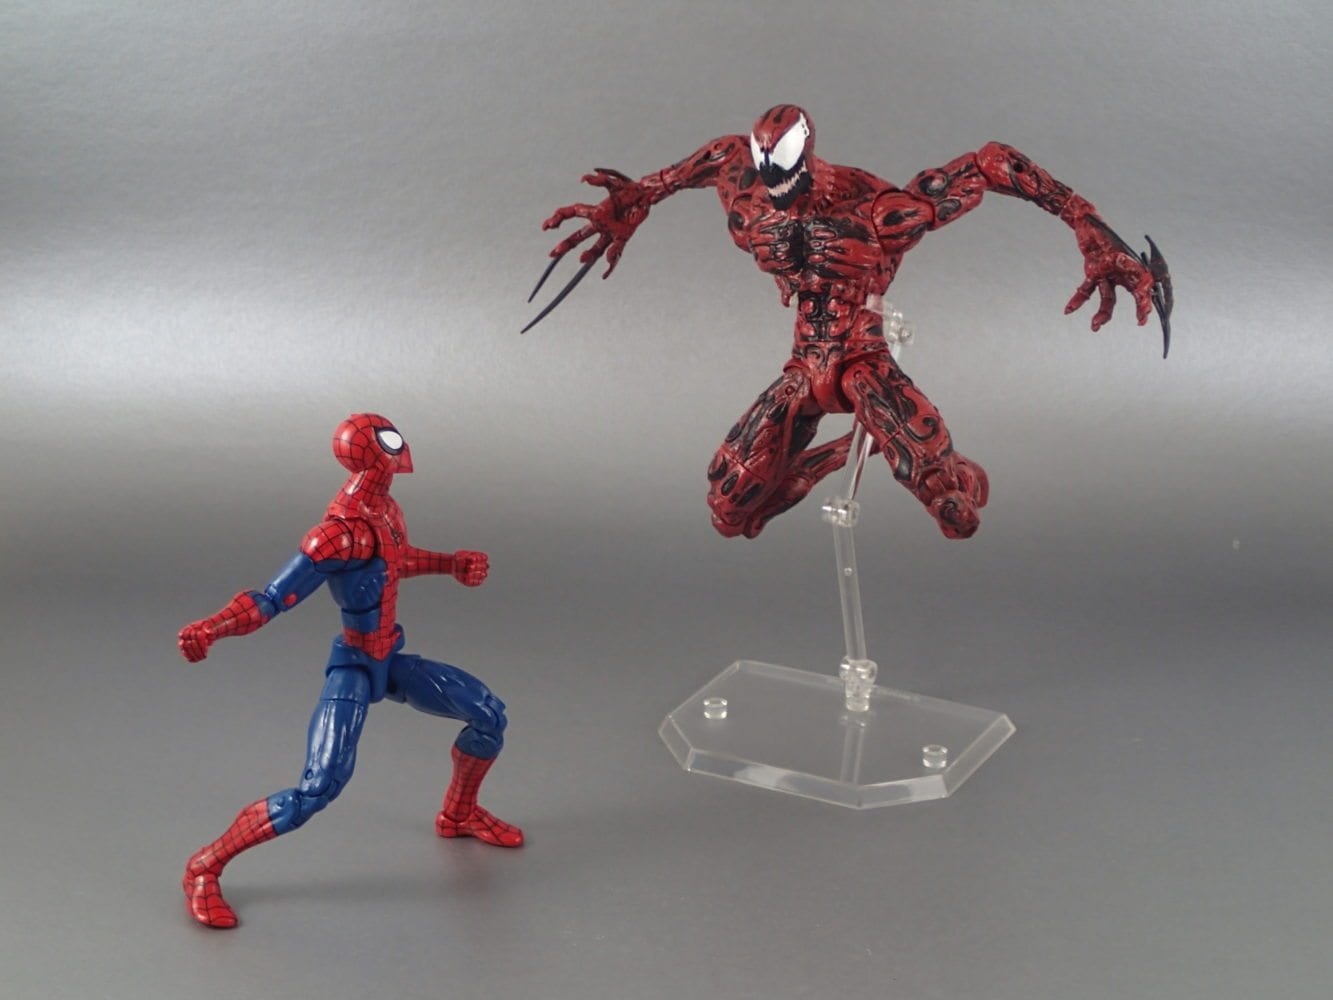 Bill pits Marvel Legends Spider-Man up against Marvel Select Carnage in the...